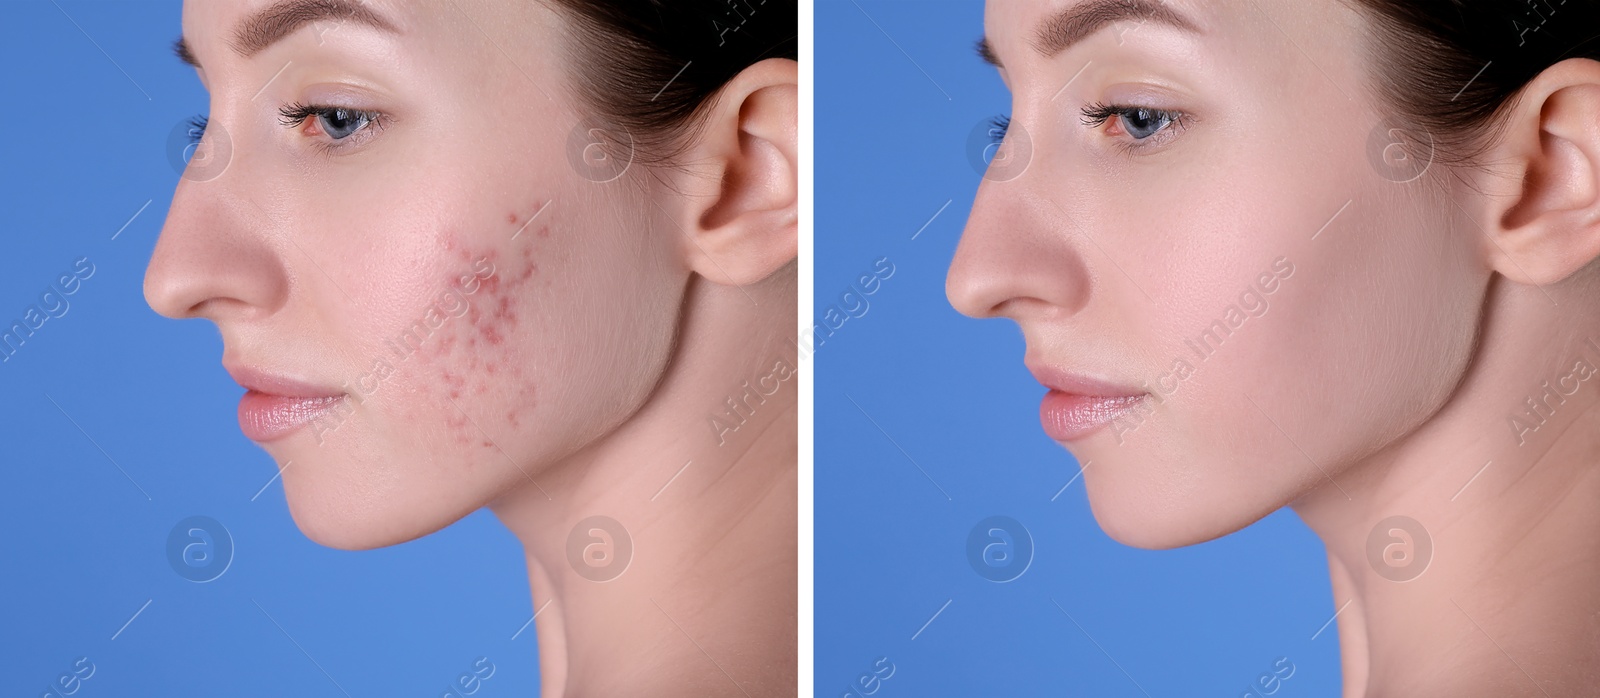 Image of Acne problem. Young woman before and after treatment on blue background, collage of photos